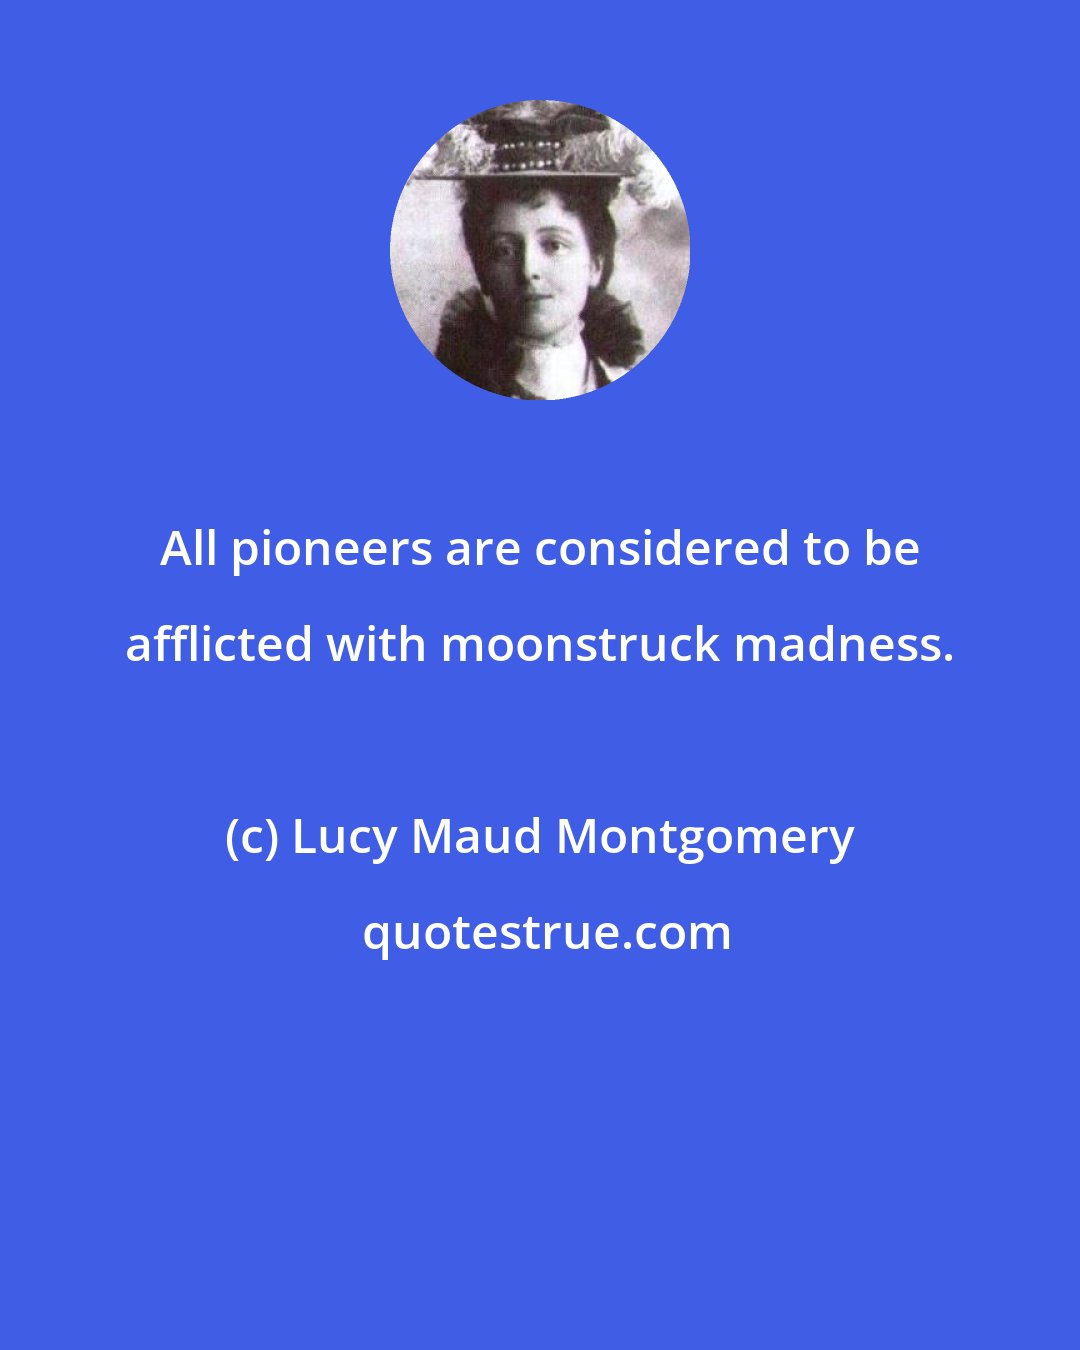 Lucy Maud Montgomery: All pioneers are considered to be afflicted with moonstruck madness.